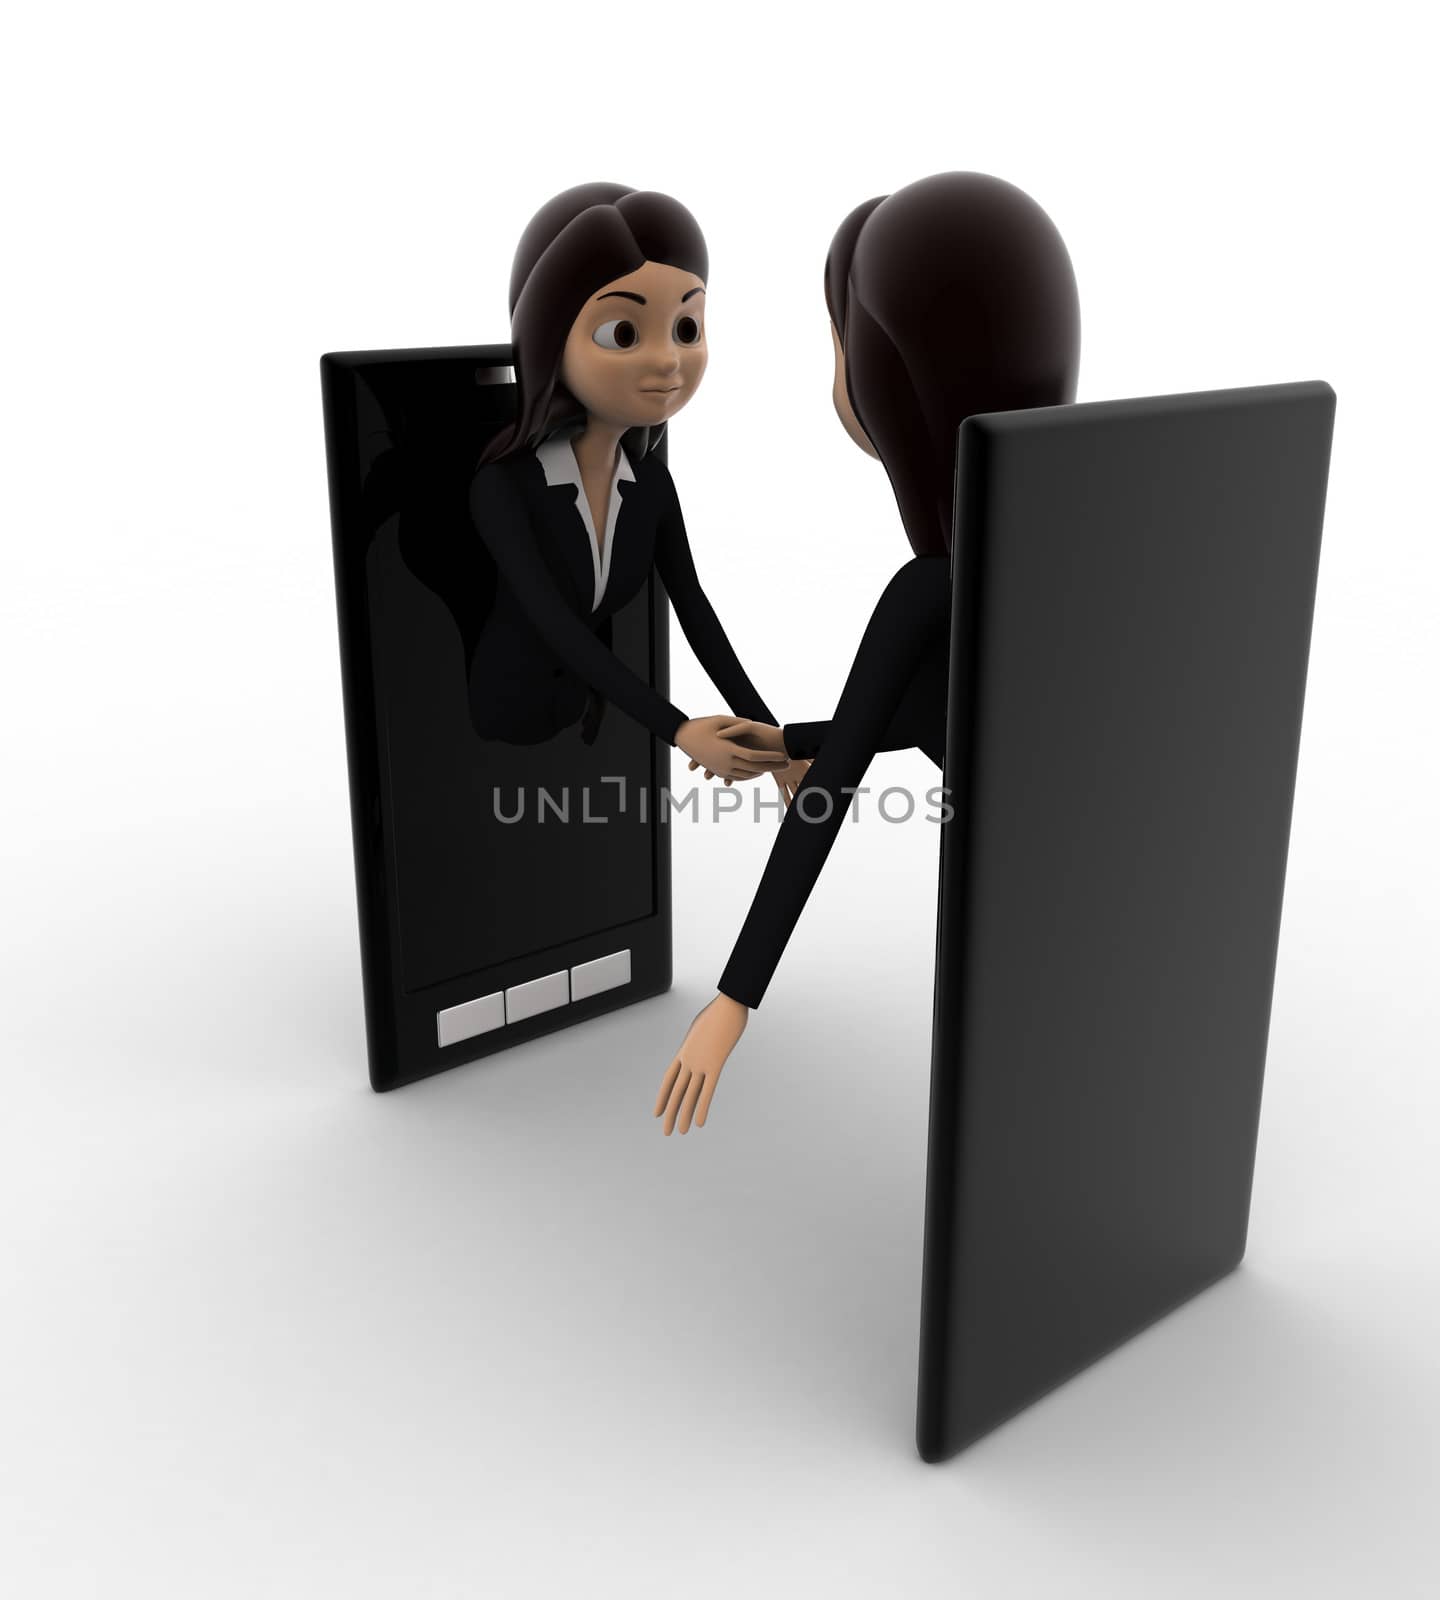 3d woman meet and ahndshake through smartphone screen concept by touchmenithin@gmail.com